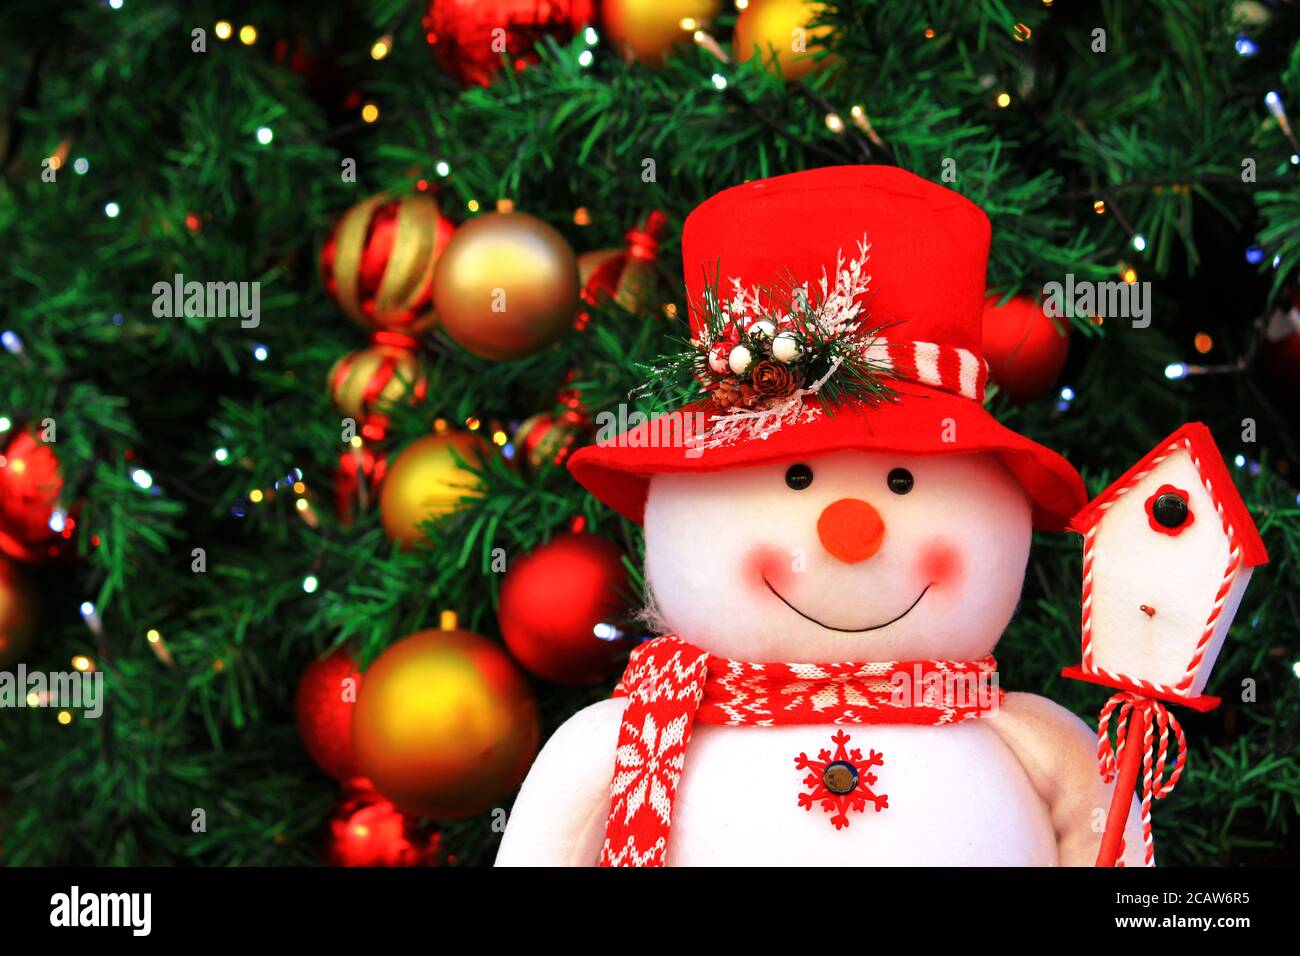 Christmas tree and cute snowman doll Stock Photo